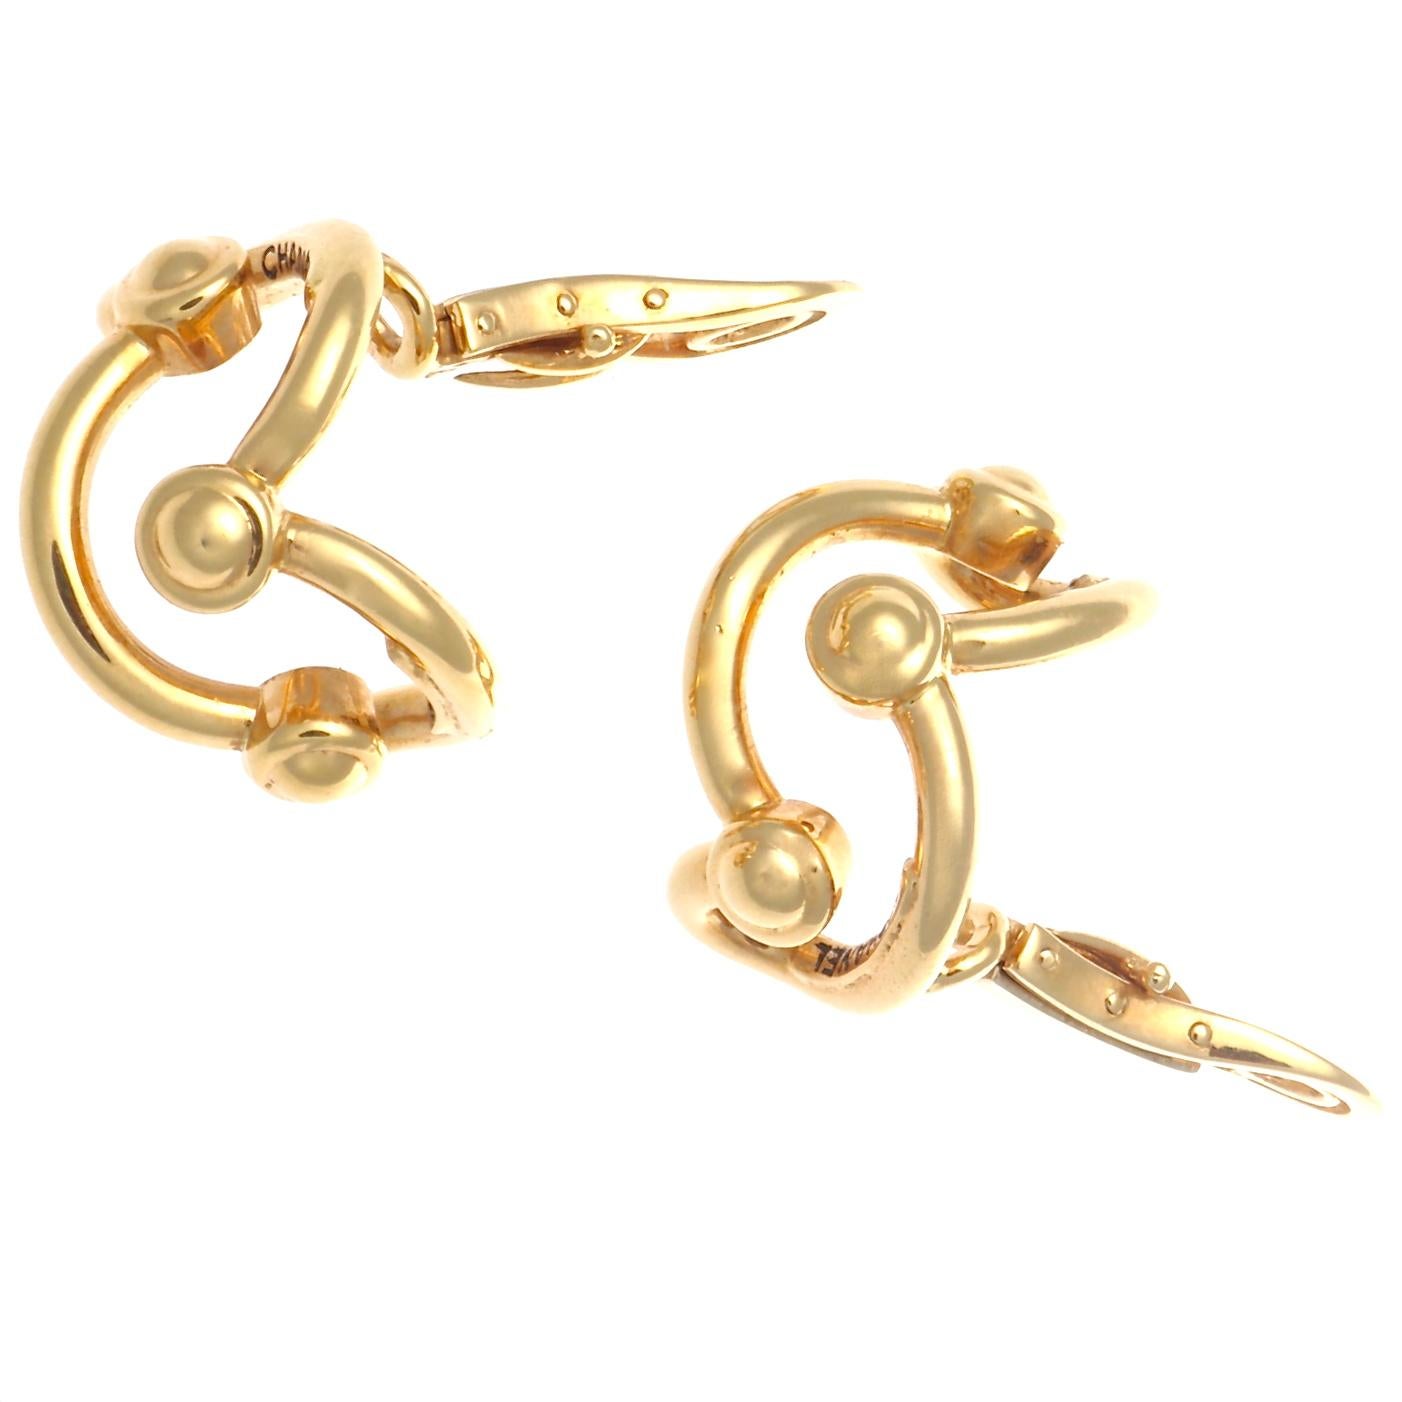 Contemporary Chanel Paris Gold Clip-On Earrings